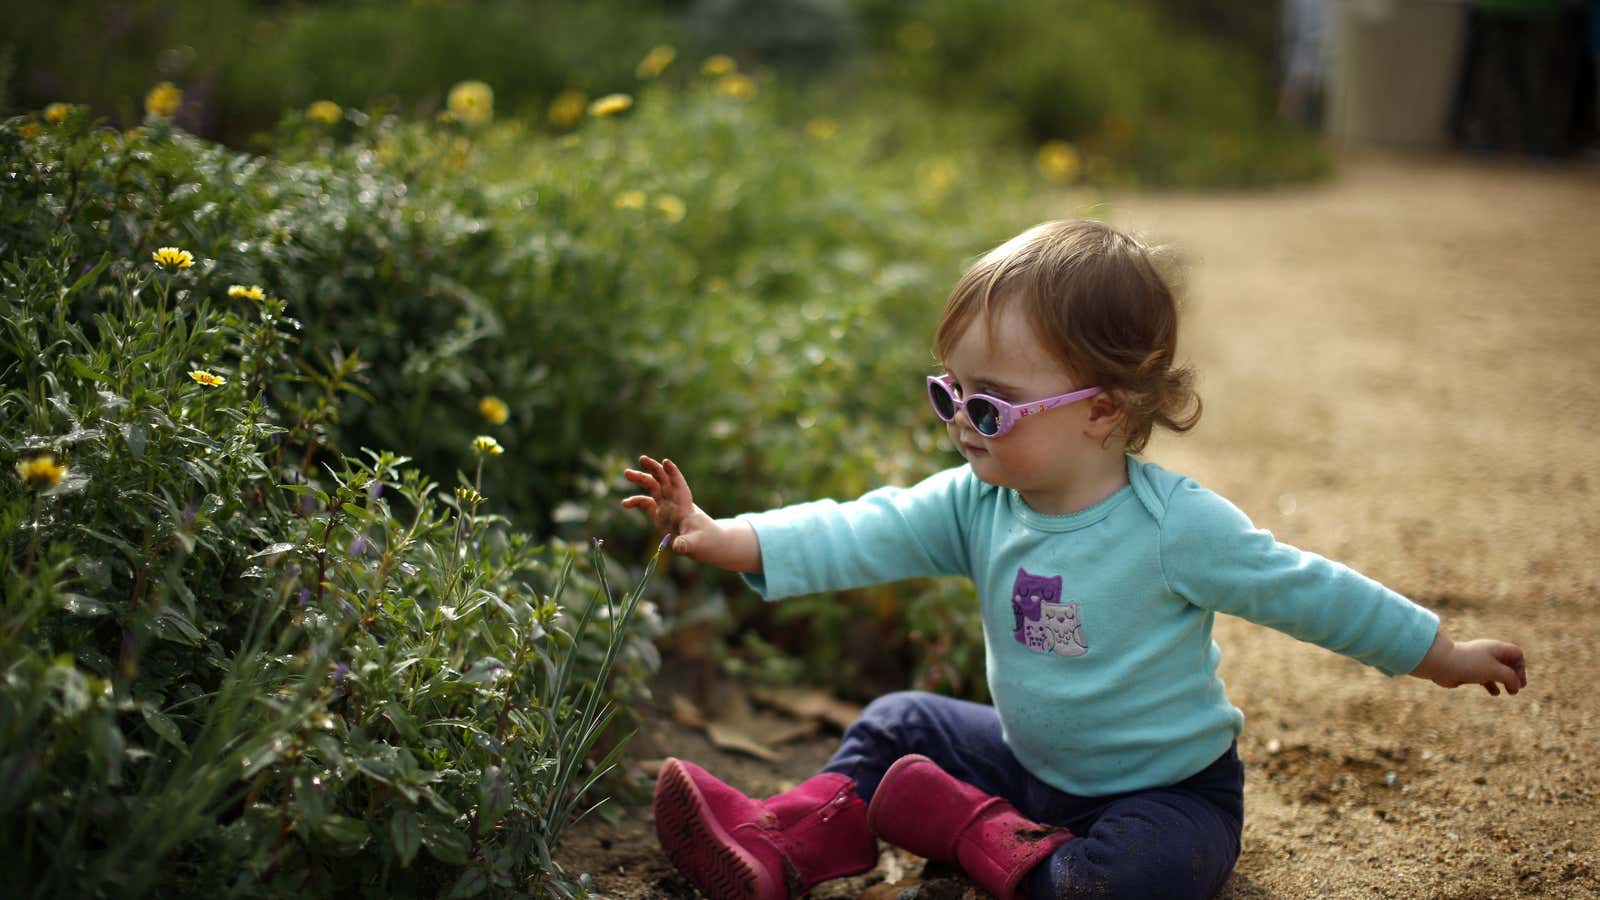 Fifteen-month-old Amelia Tompkins plays in the Pollinator Garden at the Natural History Museum in Los Angeles.